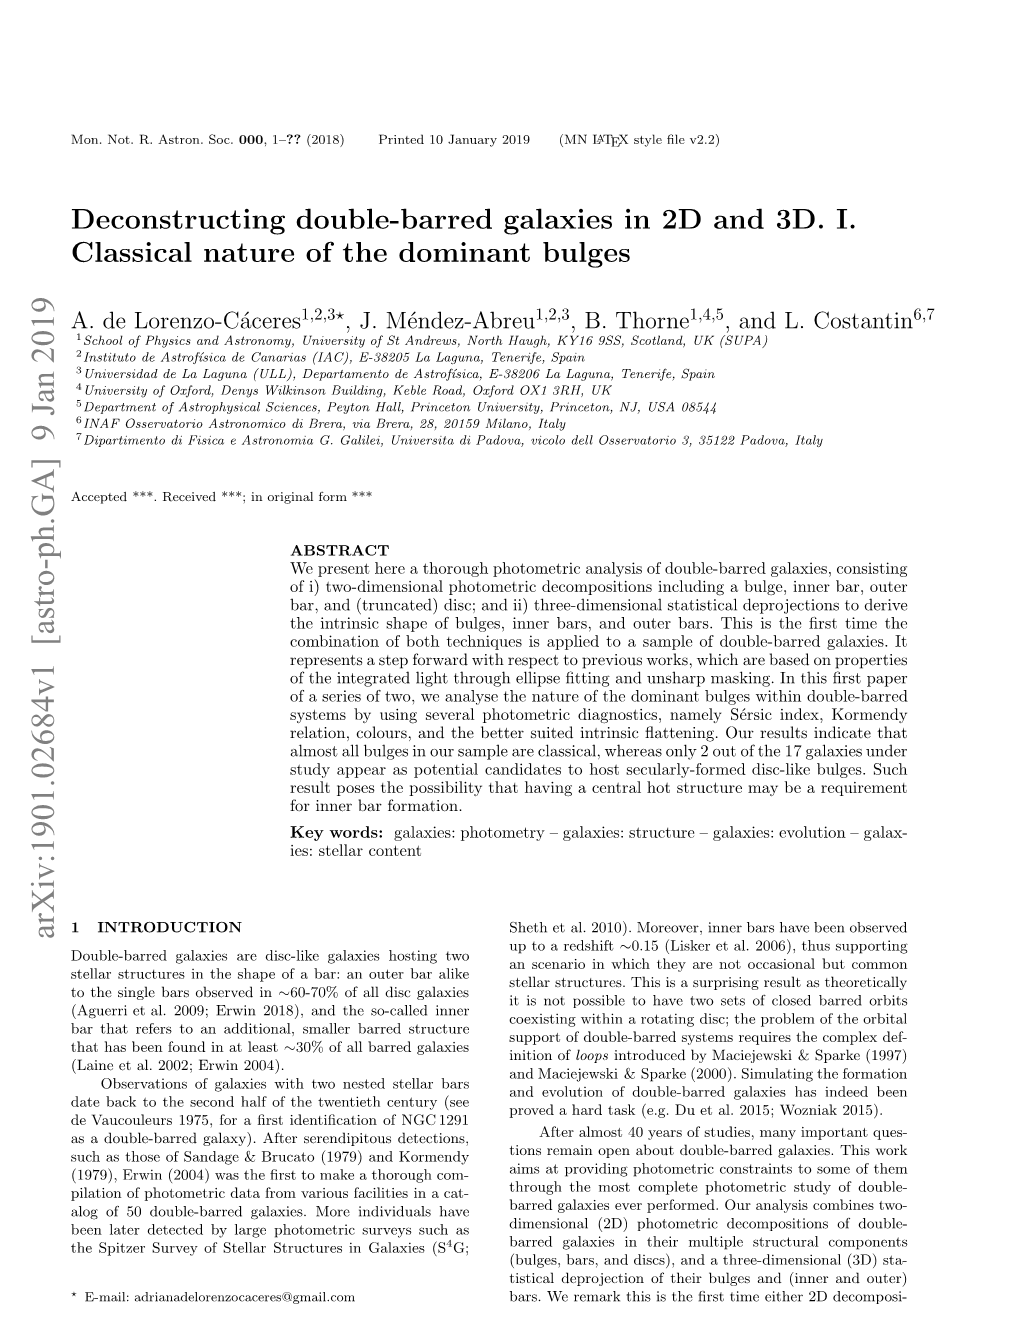 Deconstructing Double-Barred Galaxies in 2D and 3D. I. Classical